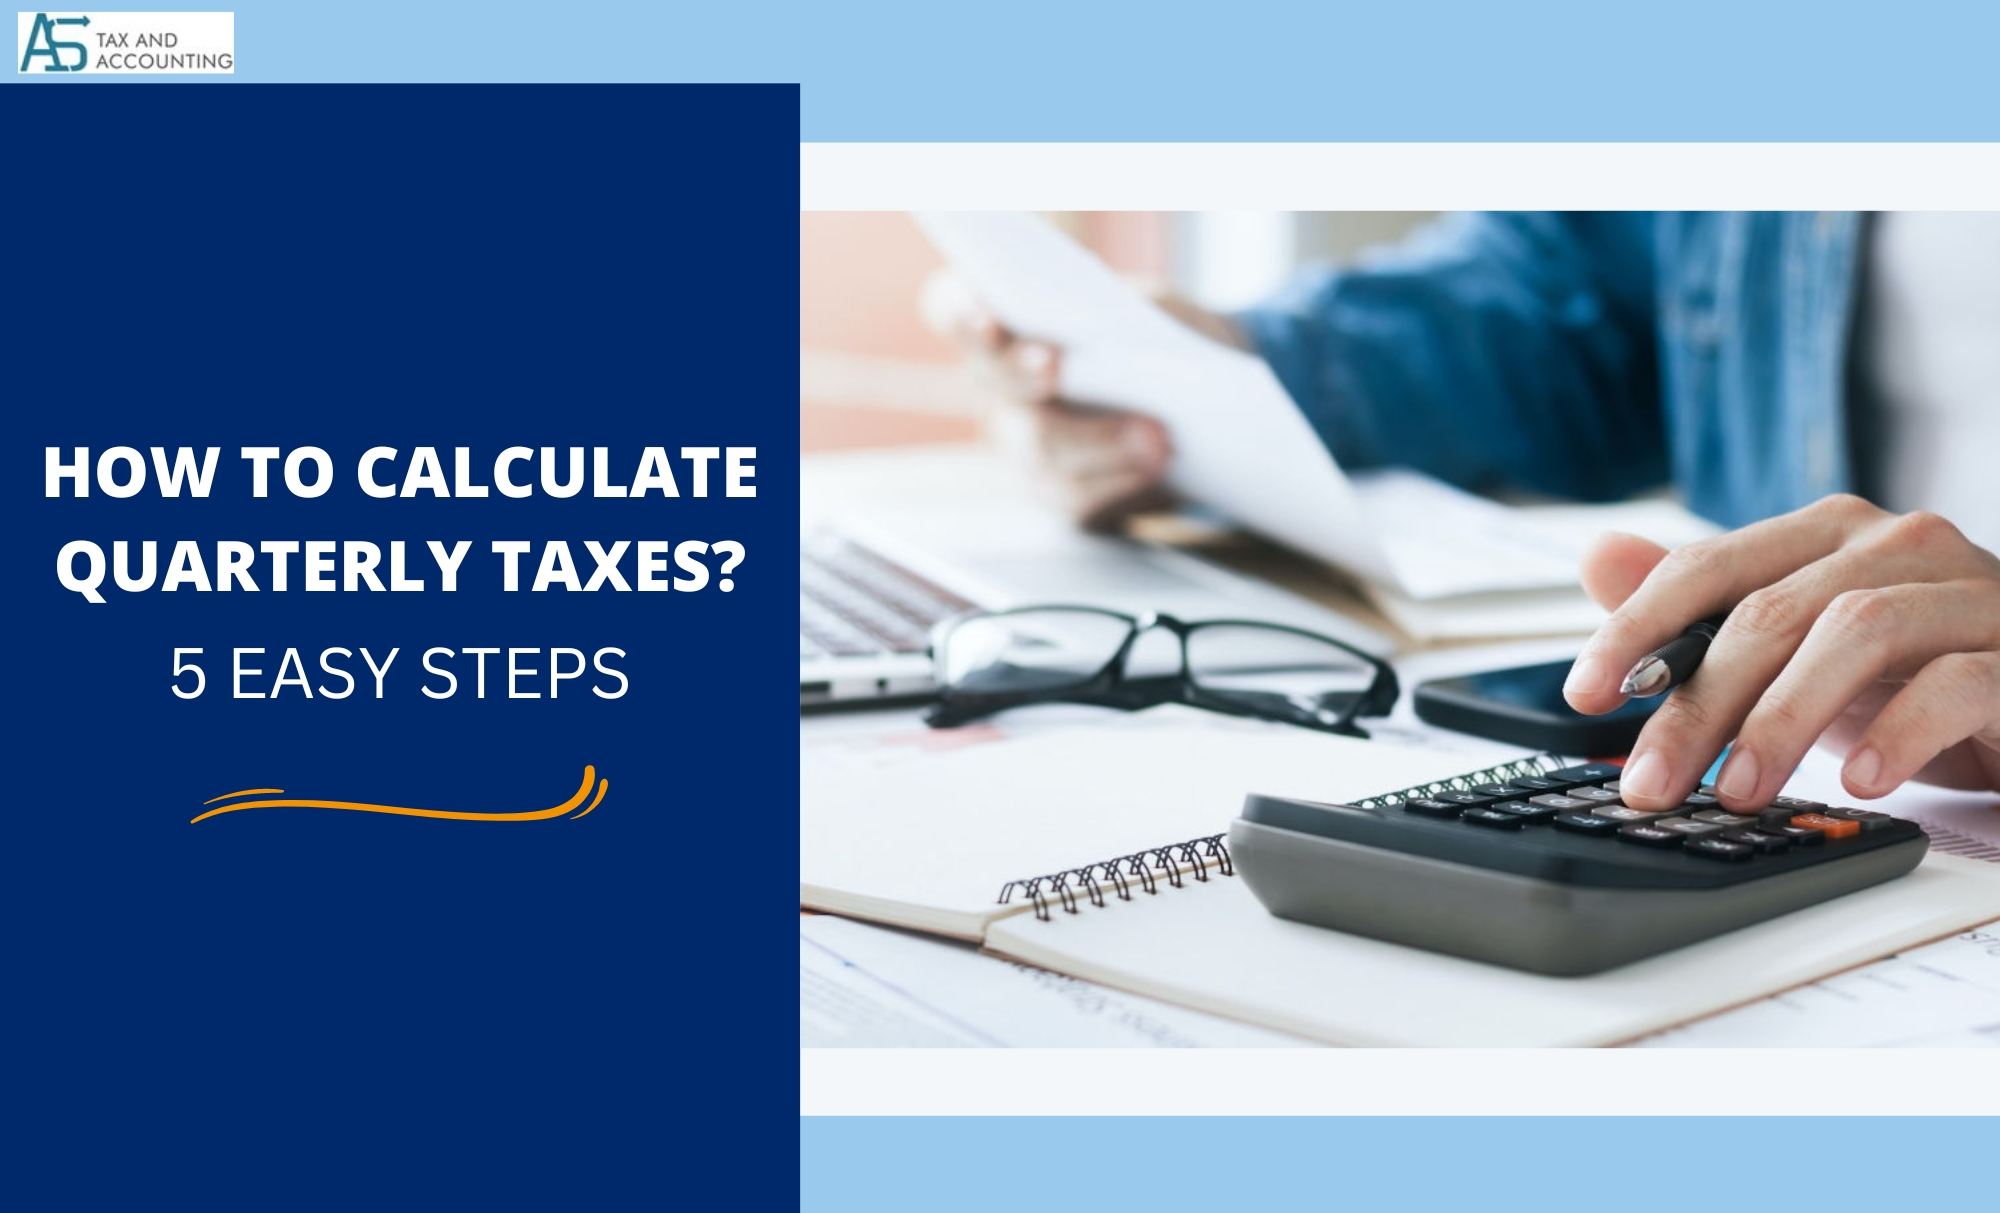 How to Calculate Quarterly Taxes